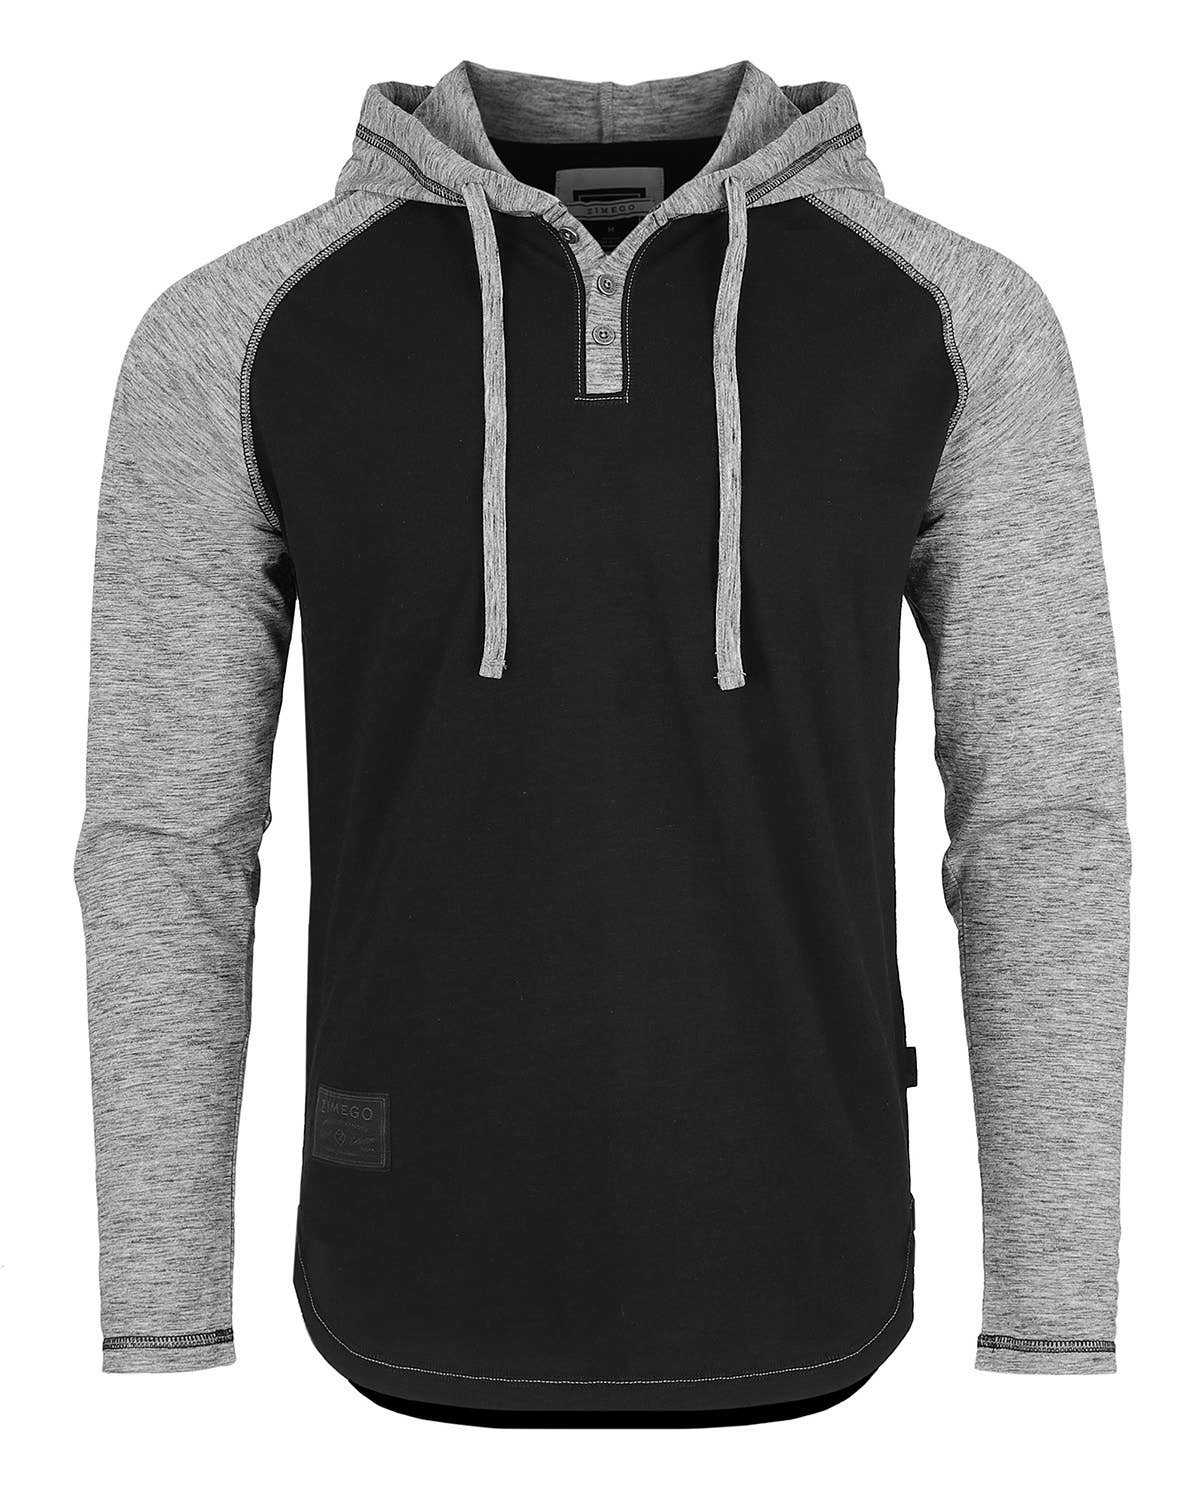 ZIMEGO Long Sleeve Color Block Pullover Thin Hoodie